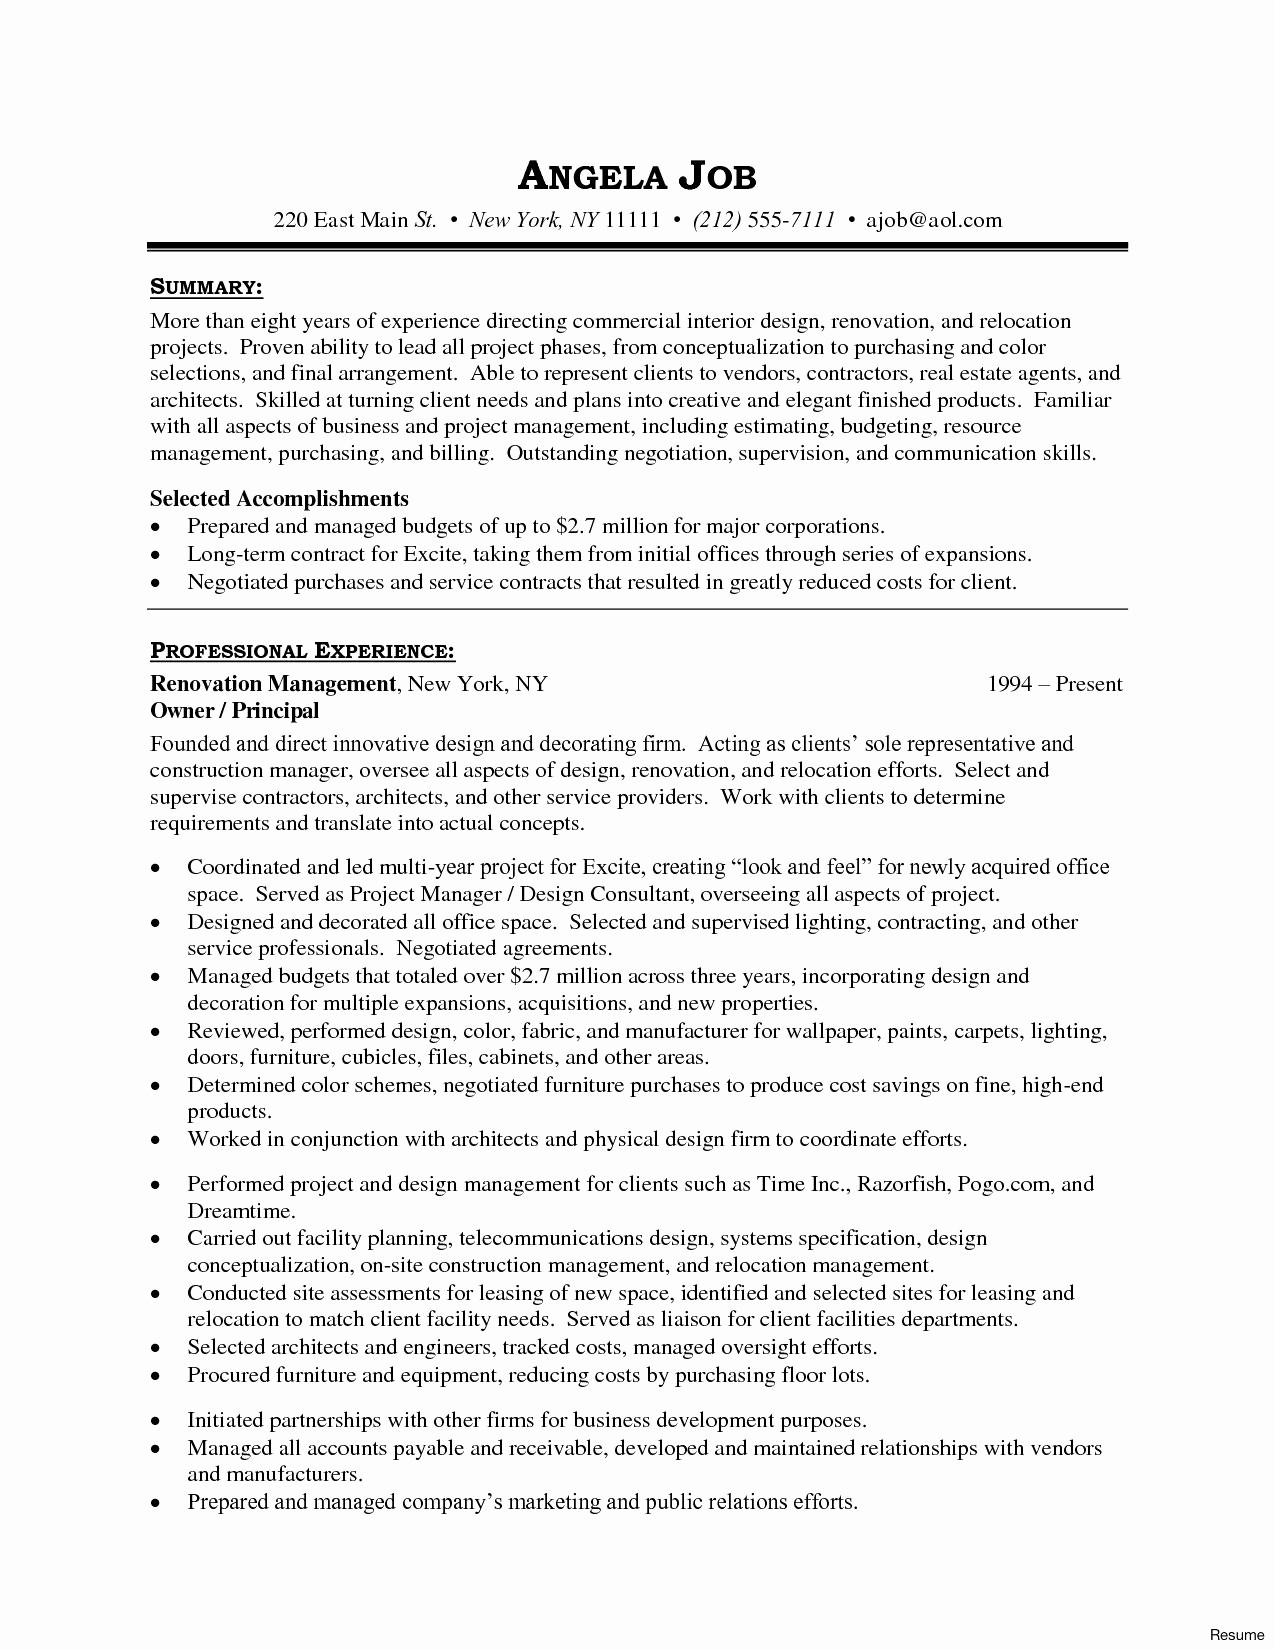 Independent Contractor Web Developer Awesome Principal Resume Document